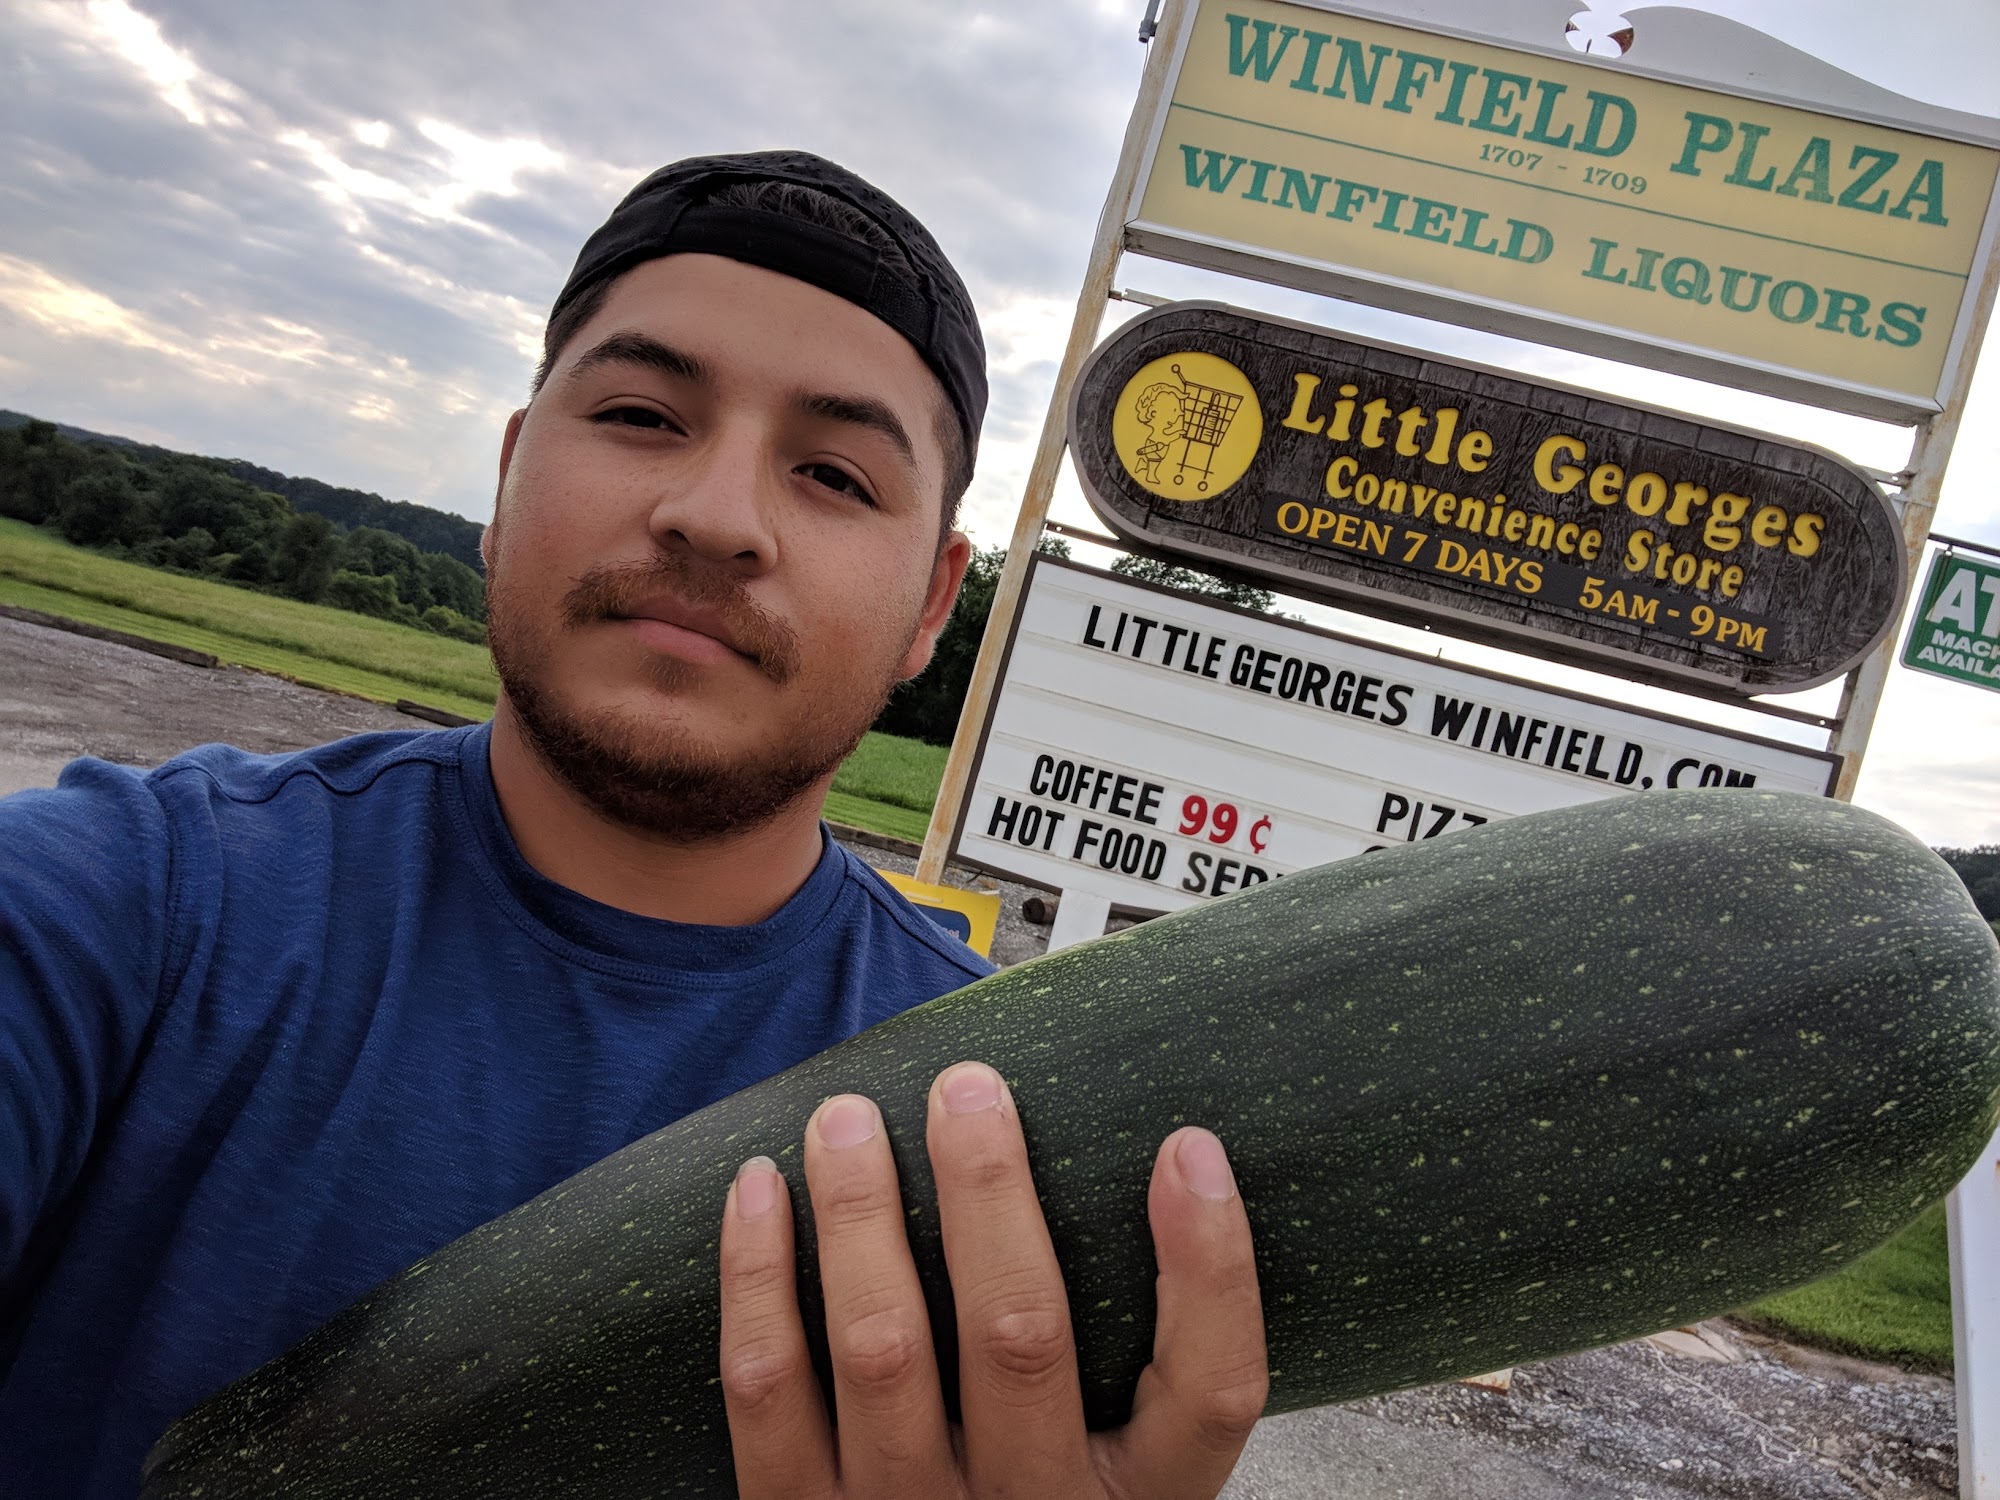 Little George's Pizzas, Subs & Groceries